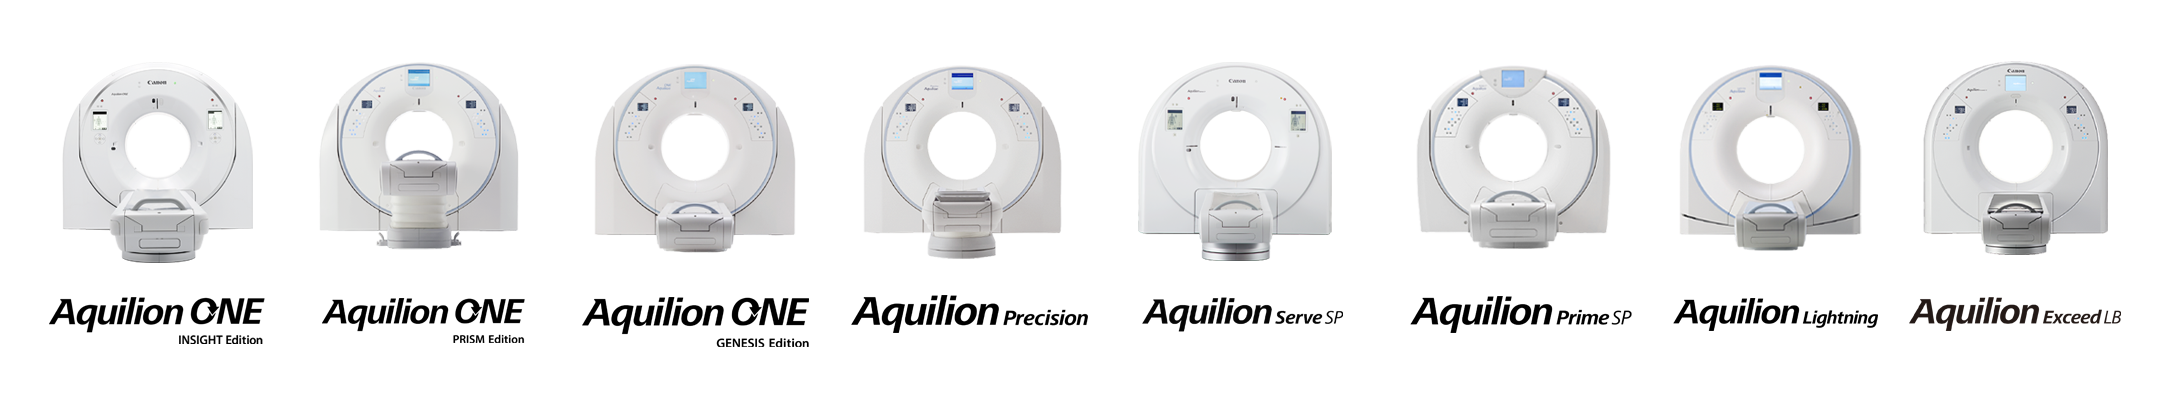 The Aquilion CT Family